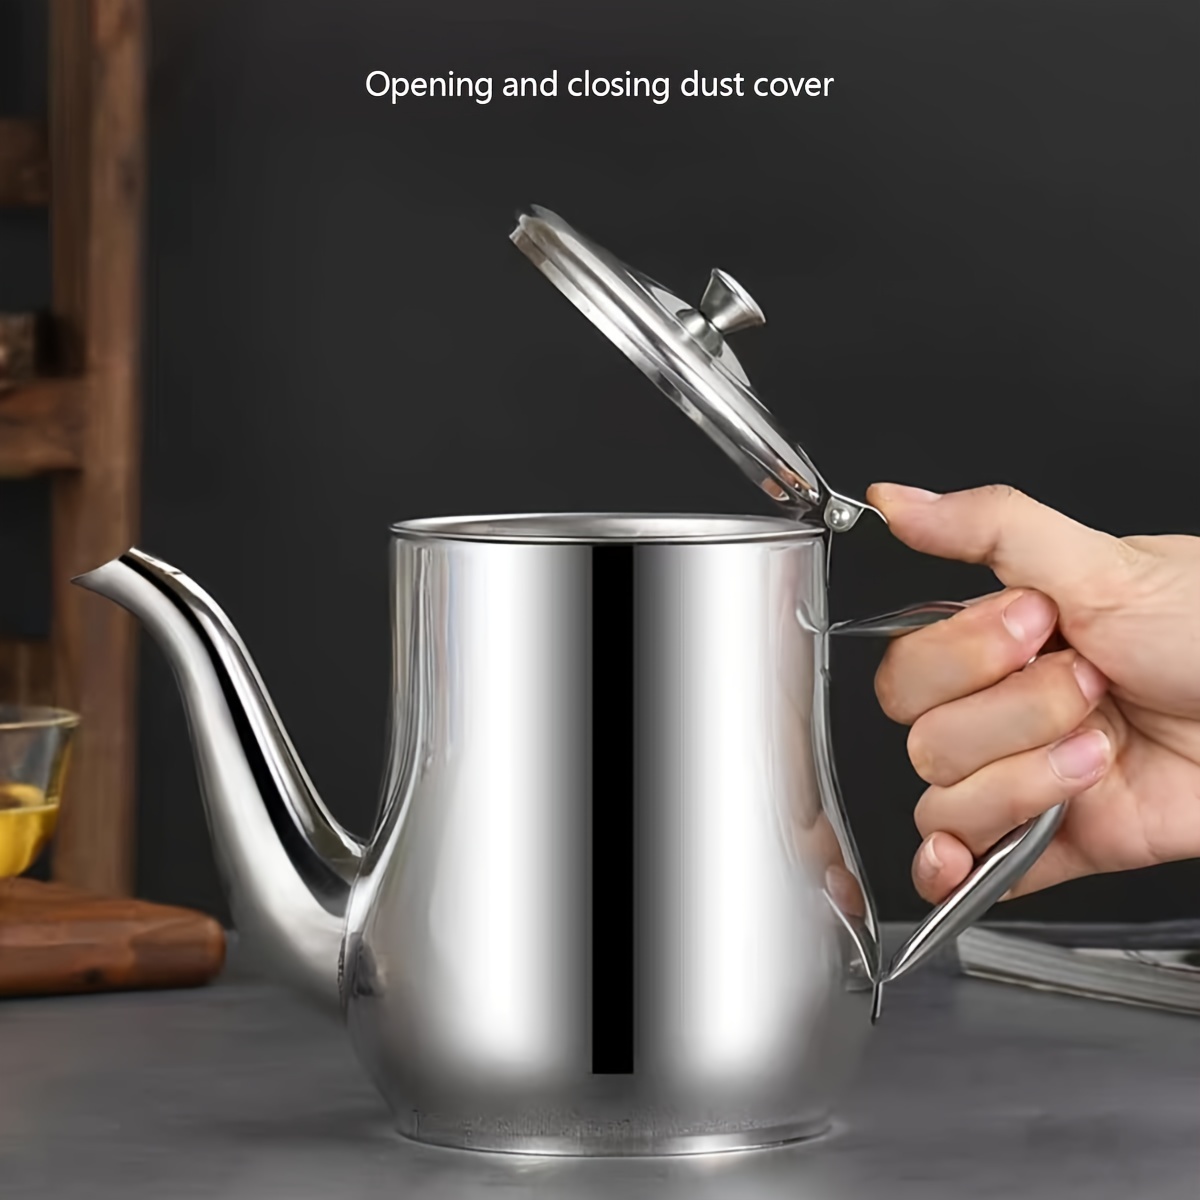 tea pot with infusers Stainless Steel Teapot Small Tea Pot Metal Teapot  Small